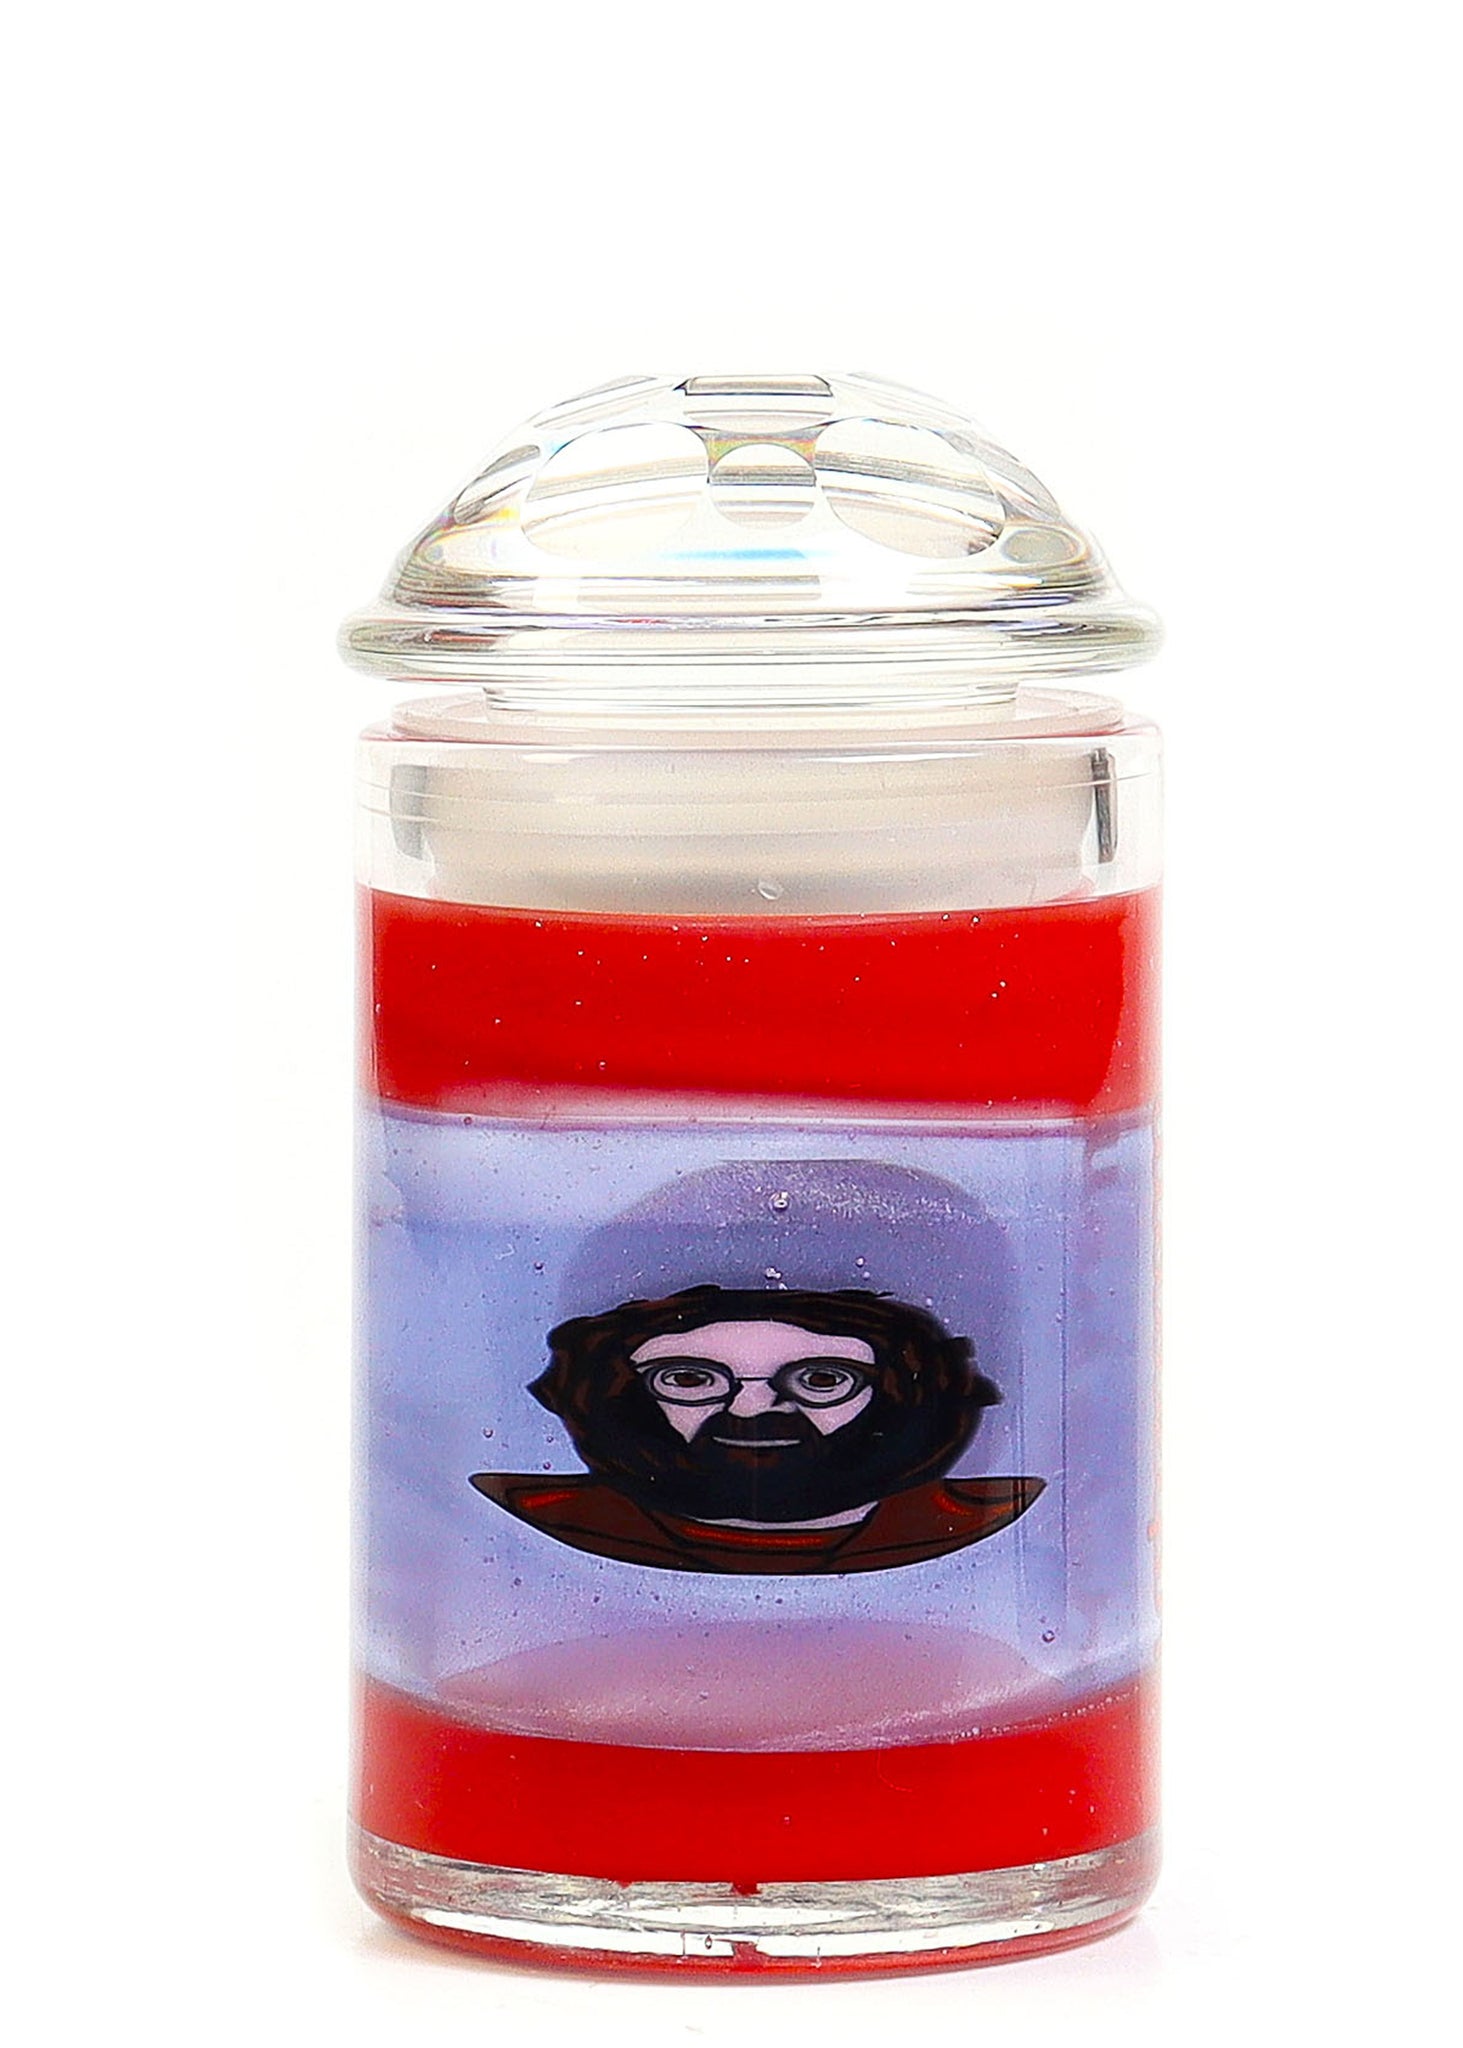 (#7) Illadelph x Strobel Grateful Dead Millies over Red and Blue Satin with Faceted Jar top